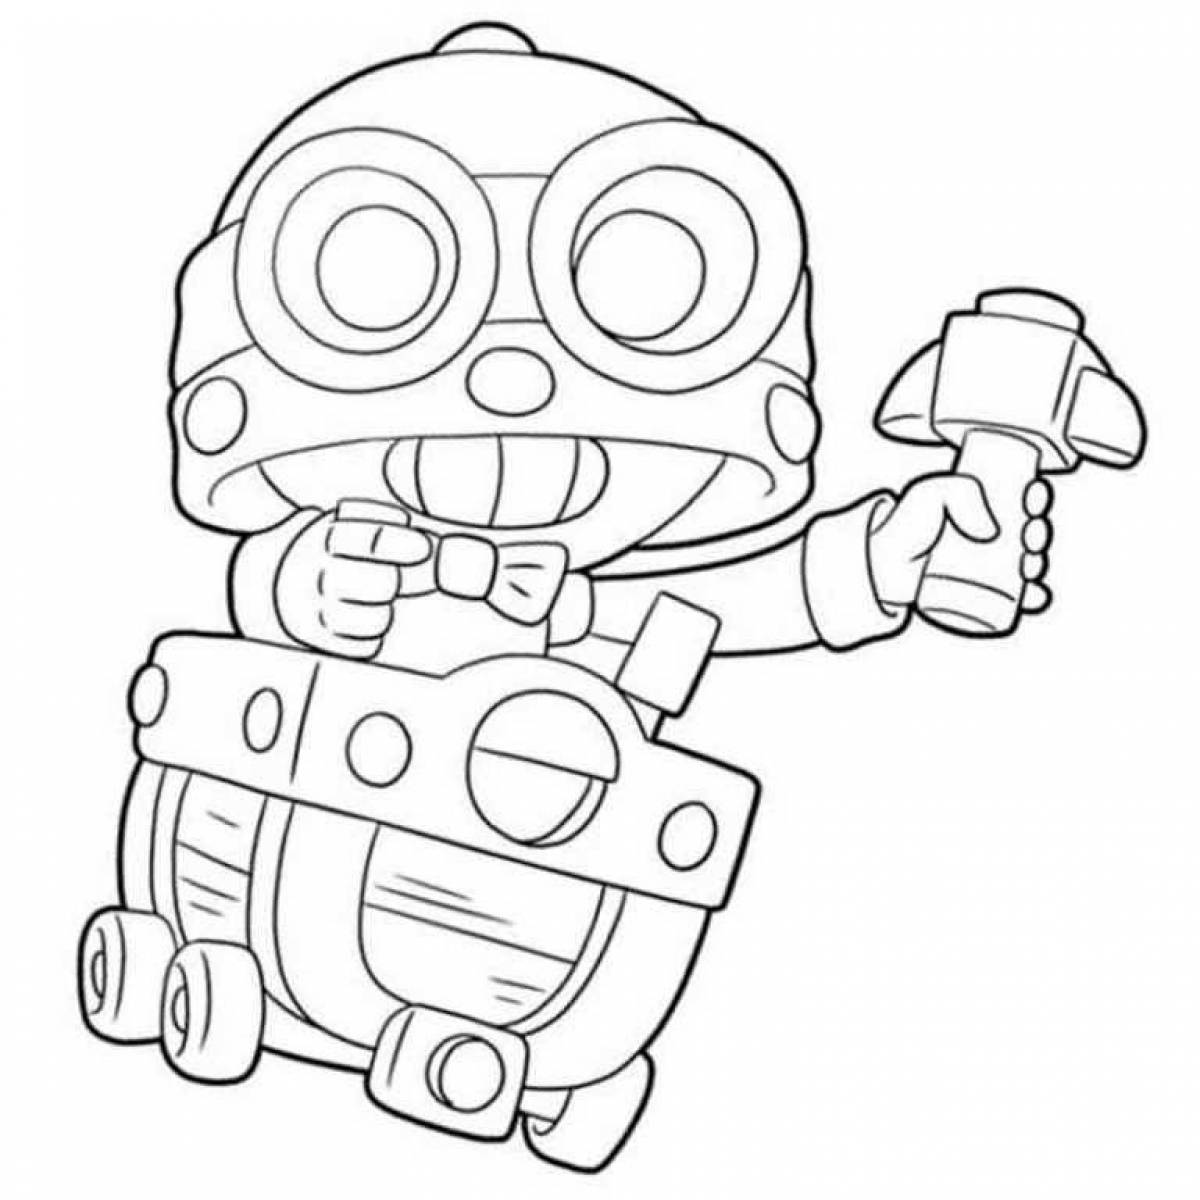 Colorful bravo stars coloring pages for boys